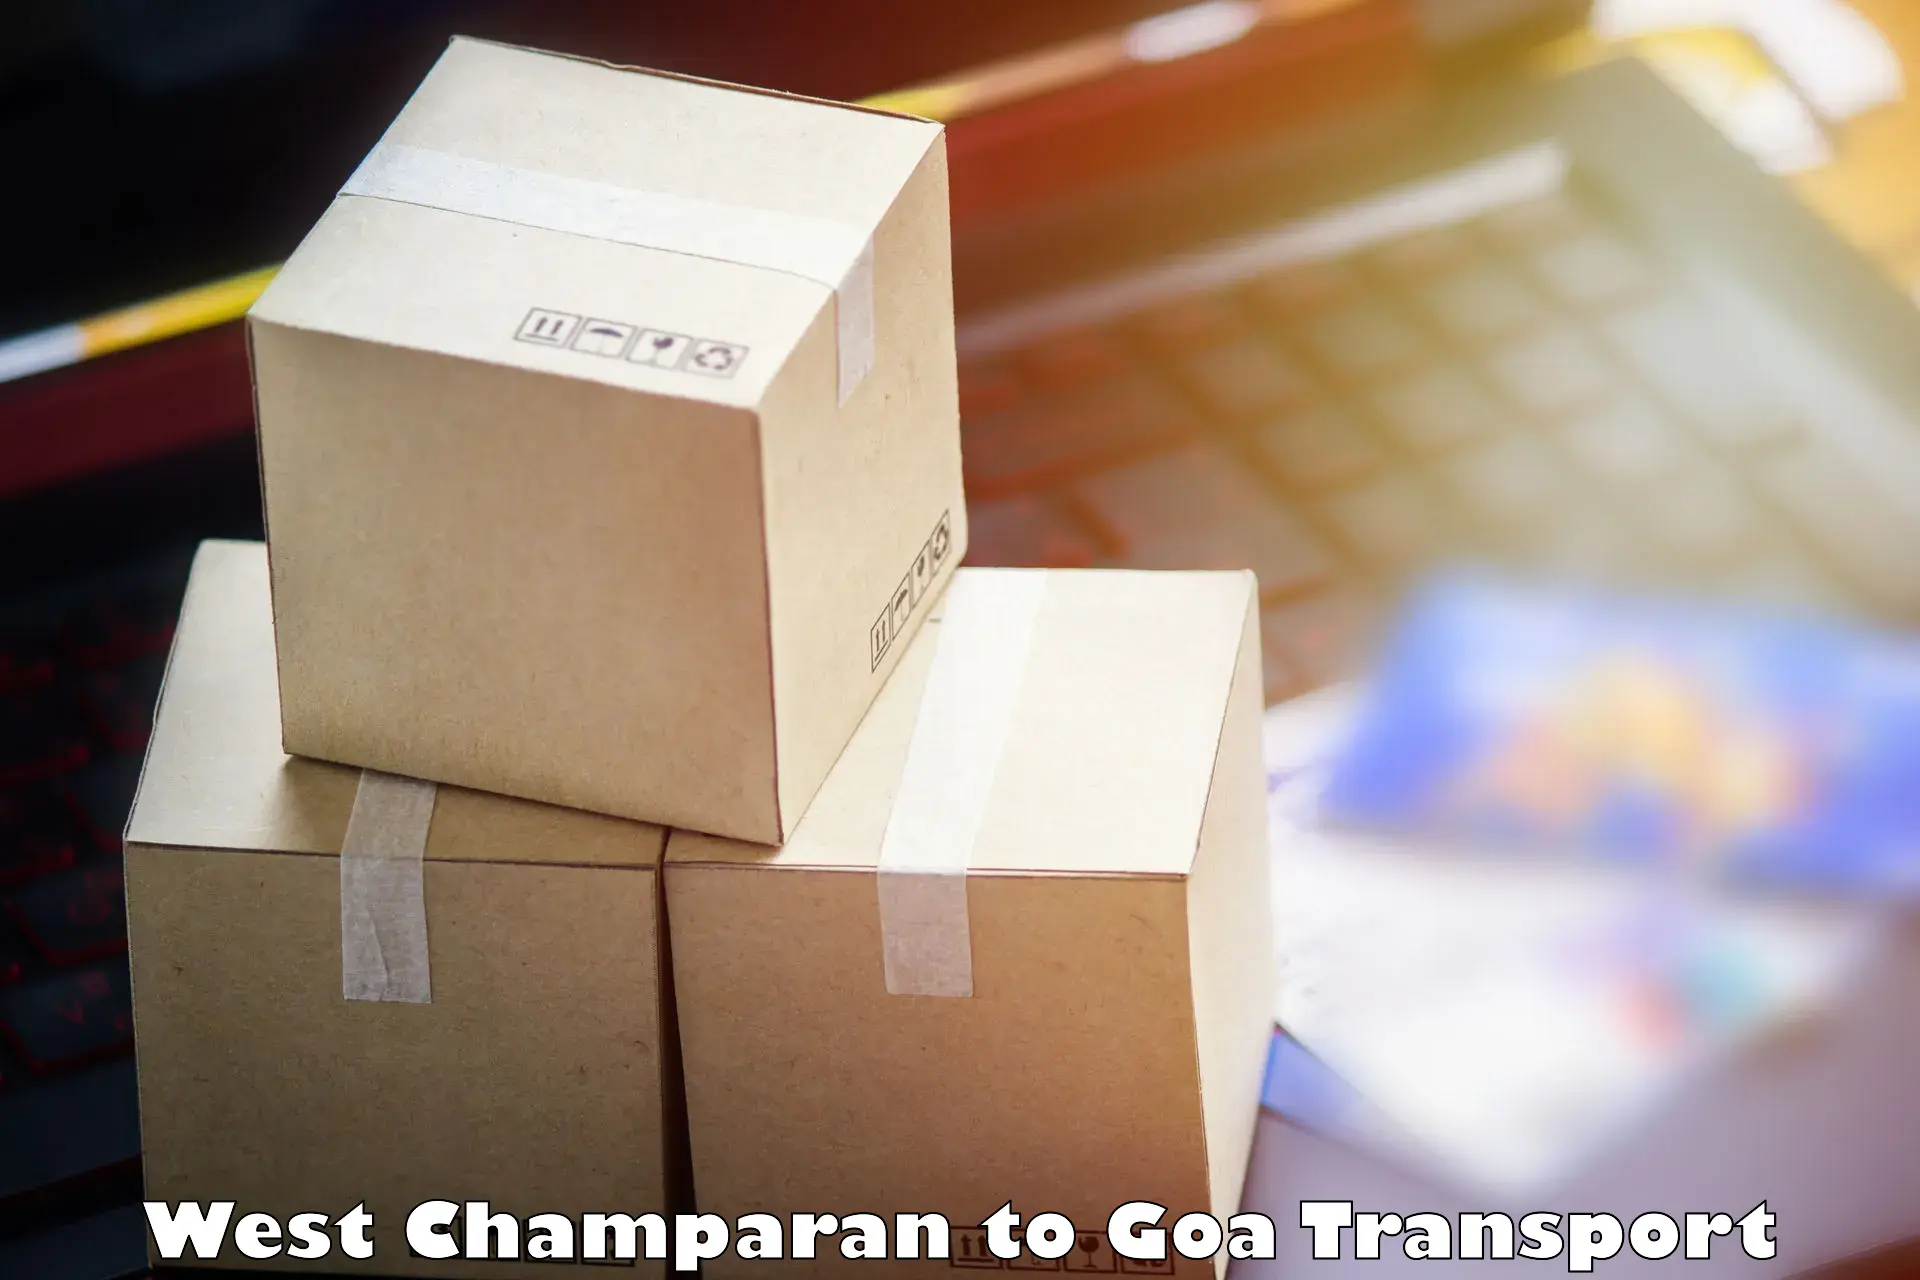 Express transport services West Champaran to Bardez